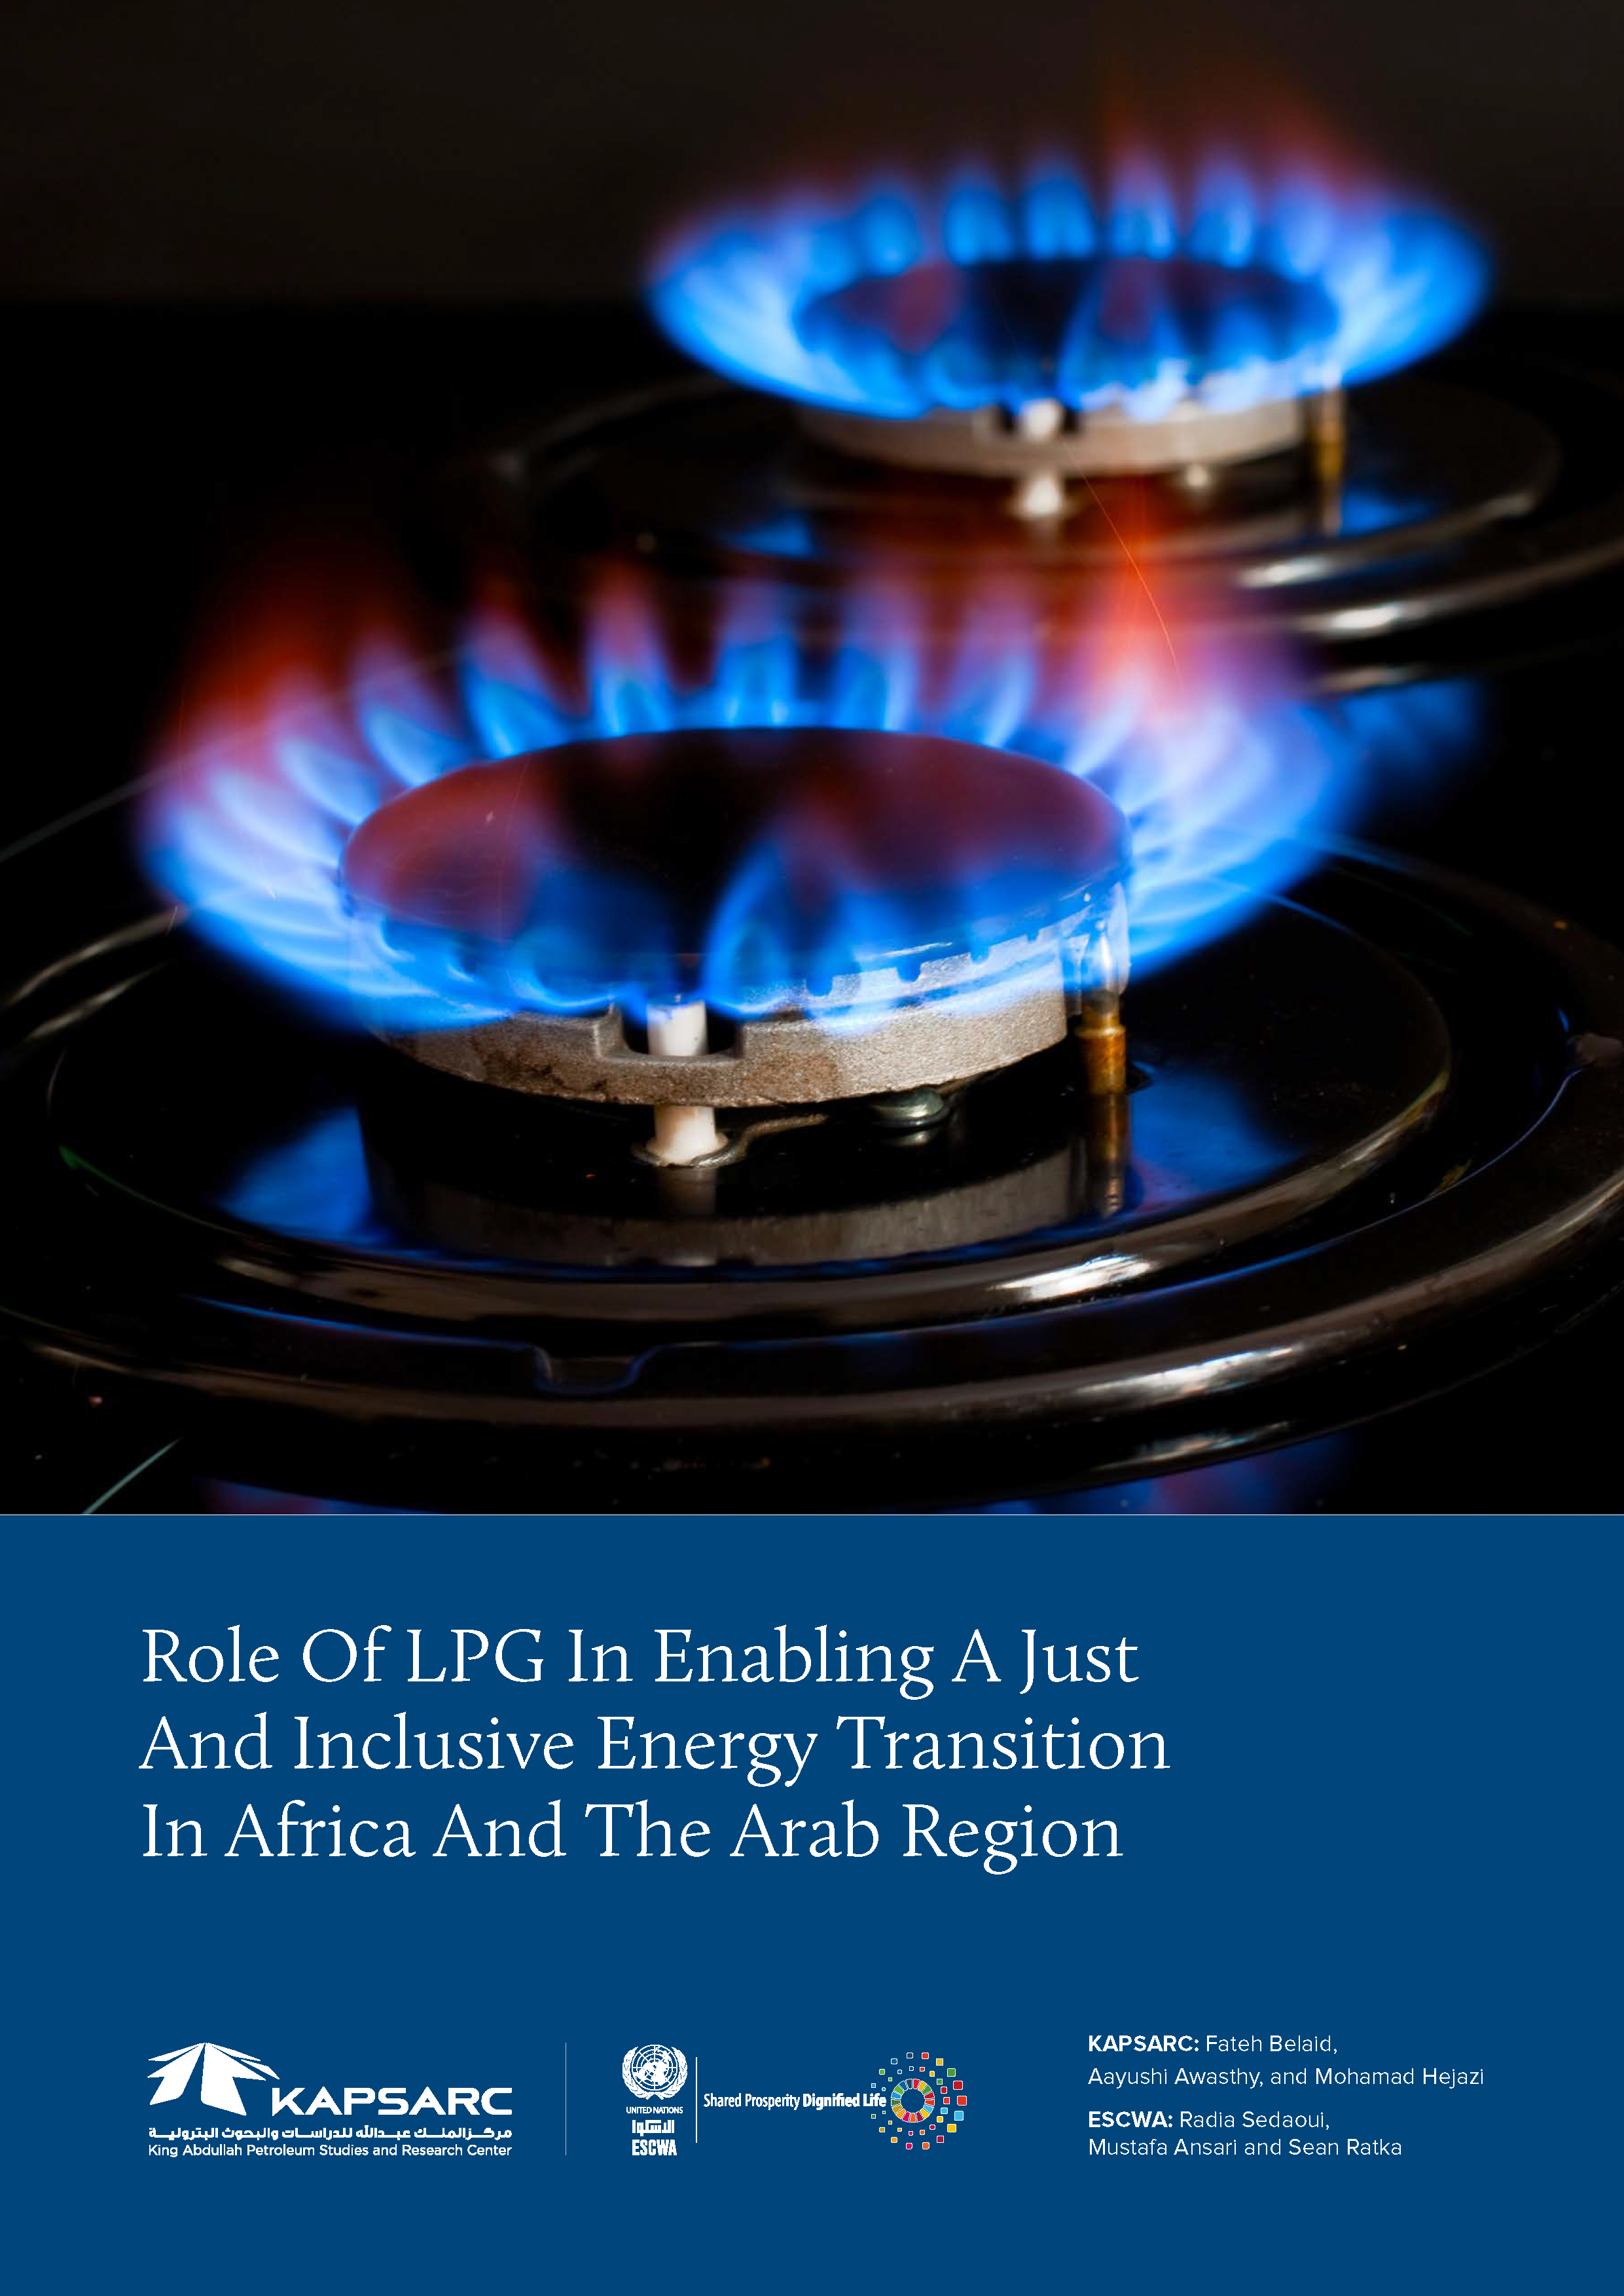 Role Of LPG In Enabling A Just And Inclusive Energy Transition In Africa And The Arab Region